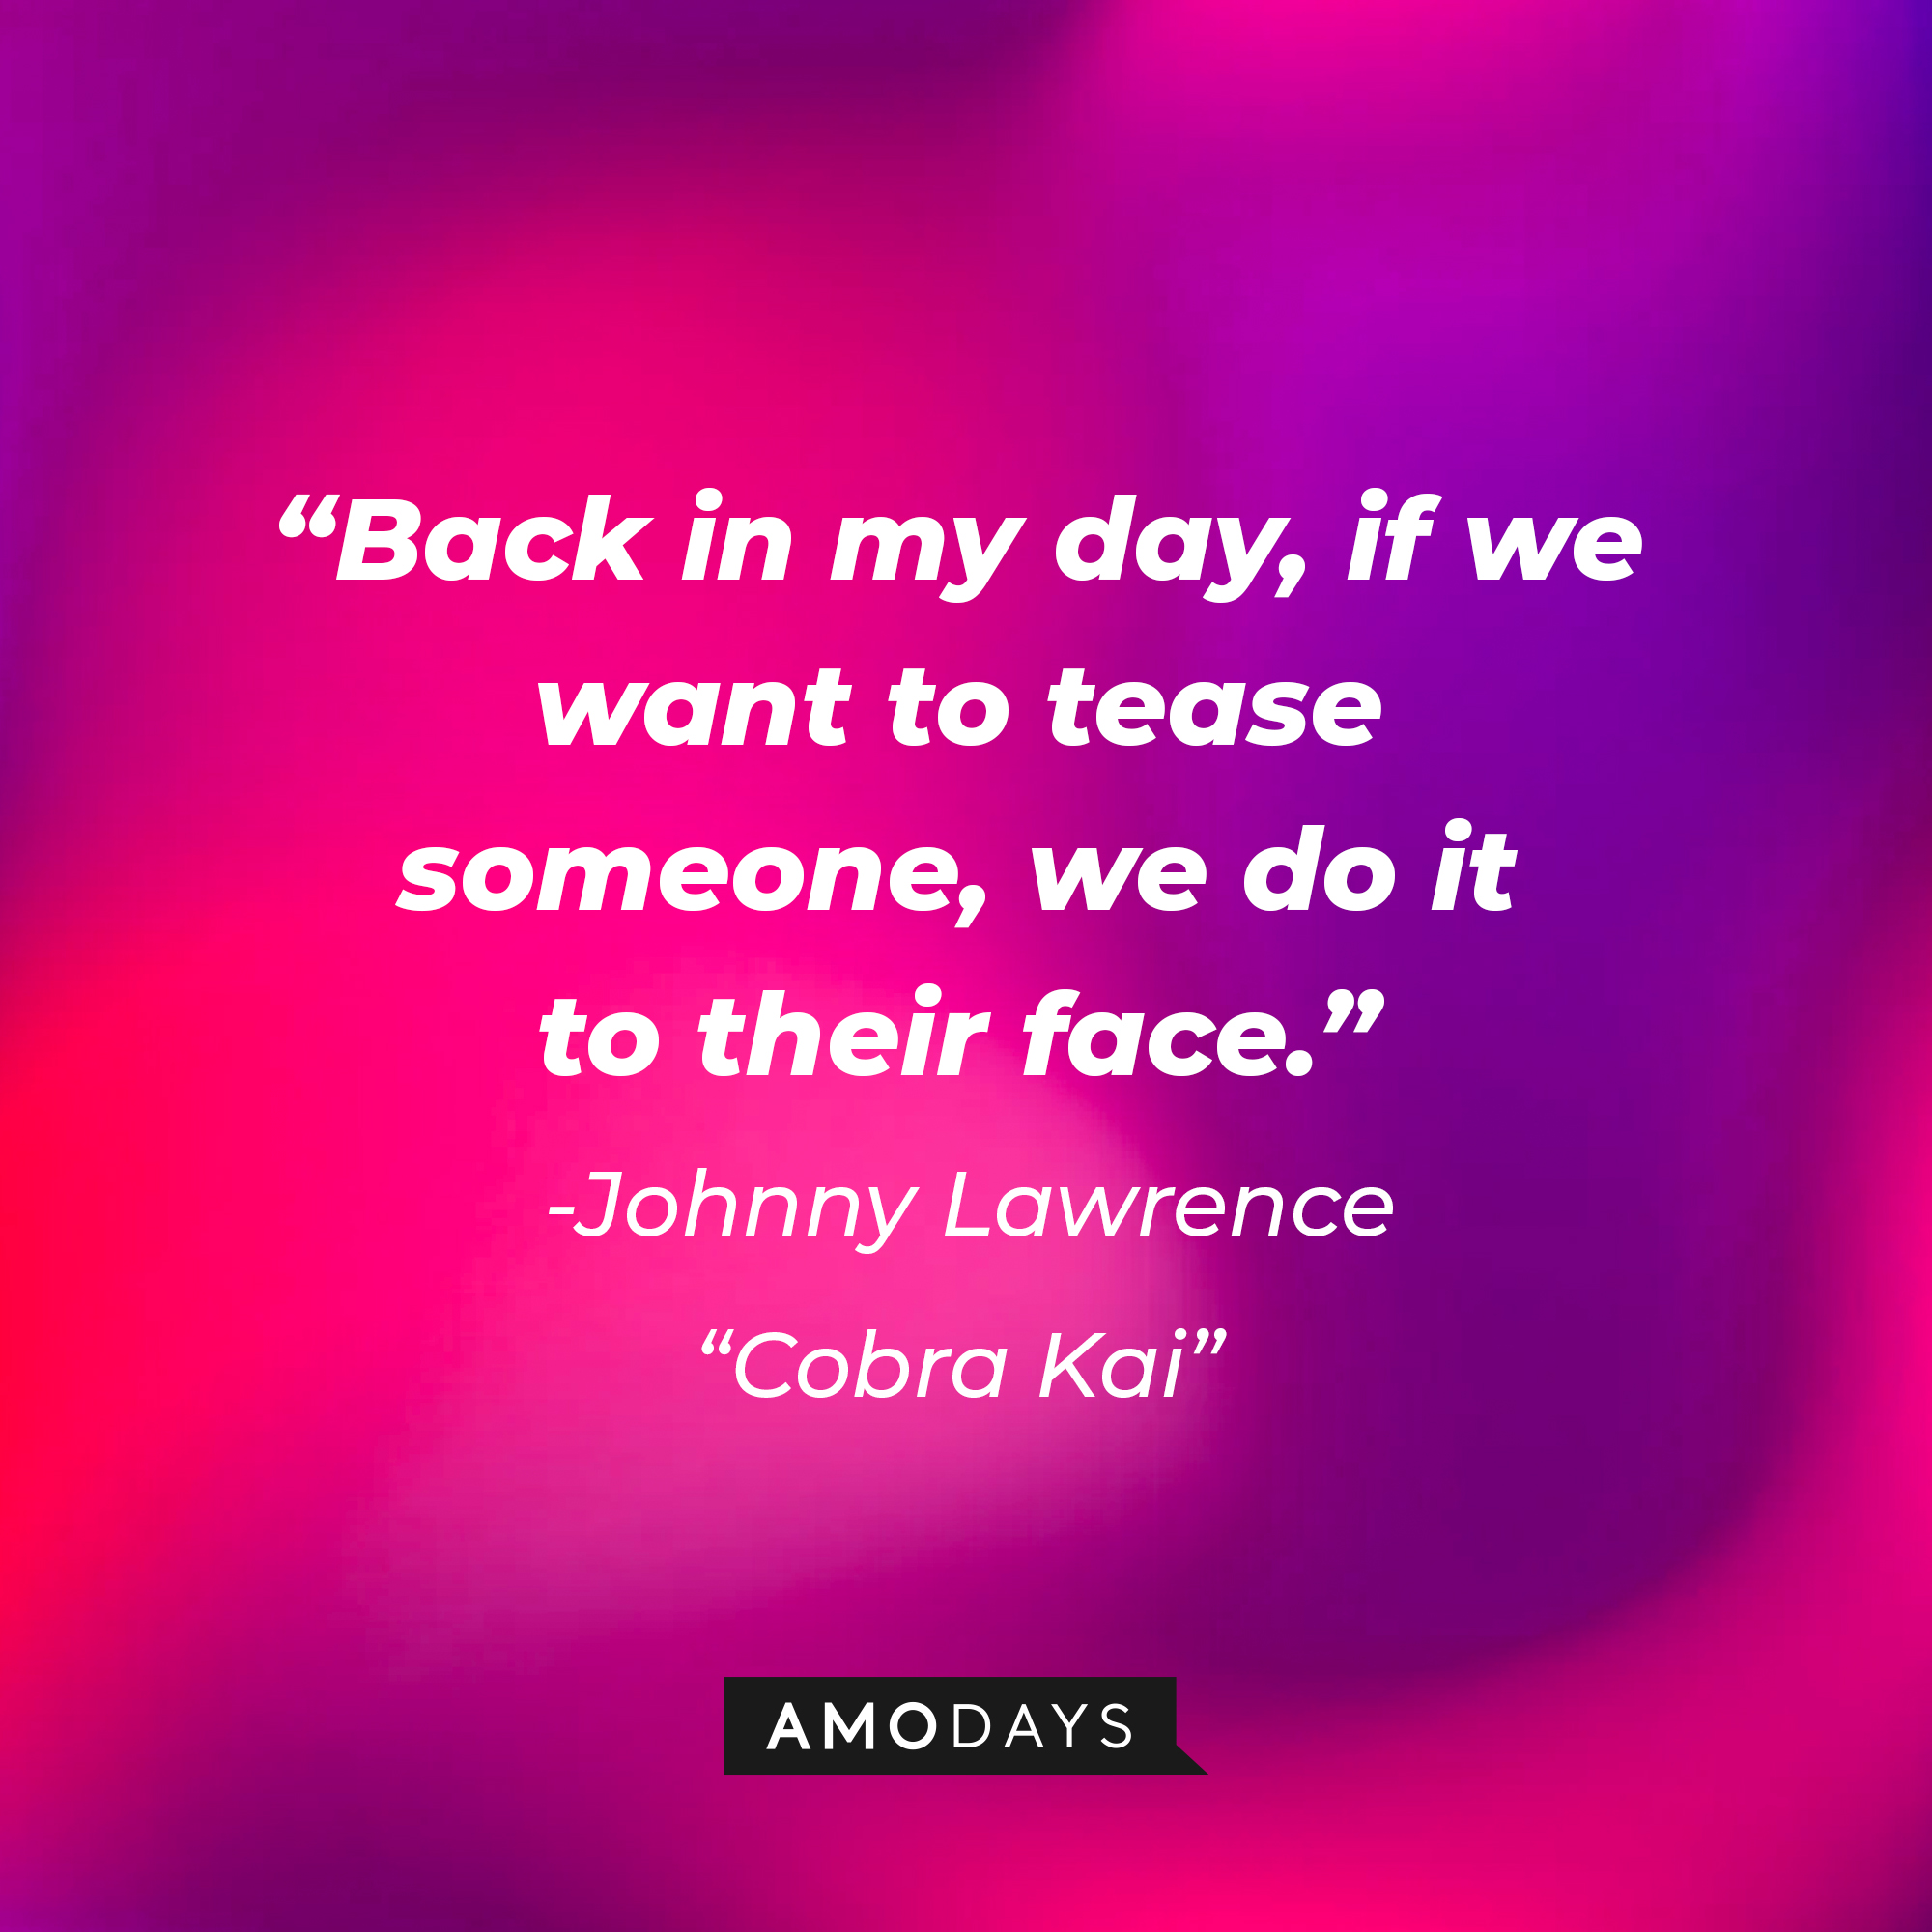 Johnny Lawrence's quote from "Cobra Kai:" “Back in my day, if we want to tease someone, we do it to their face.” | Source: AmoDays